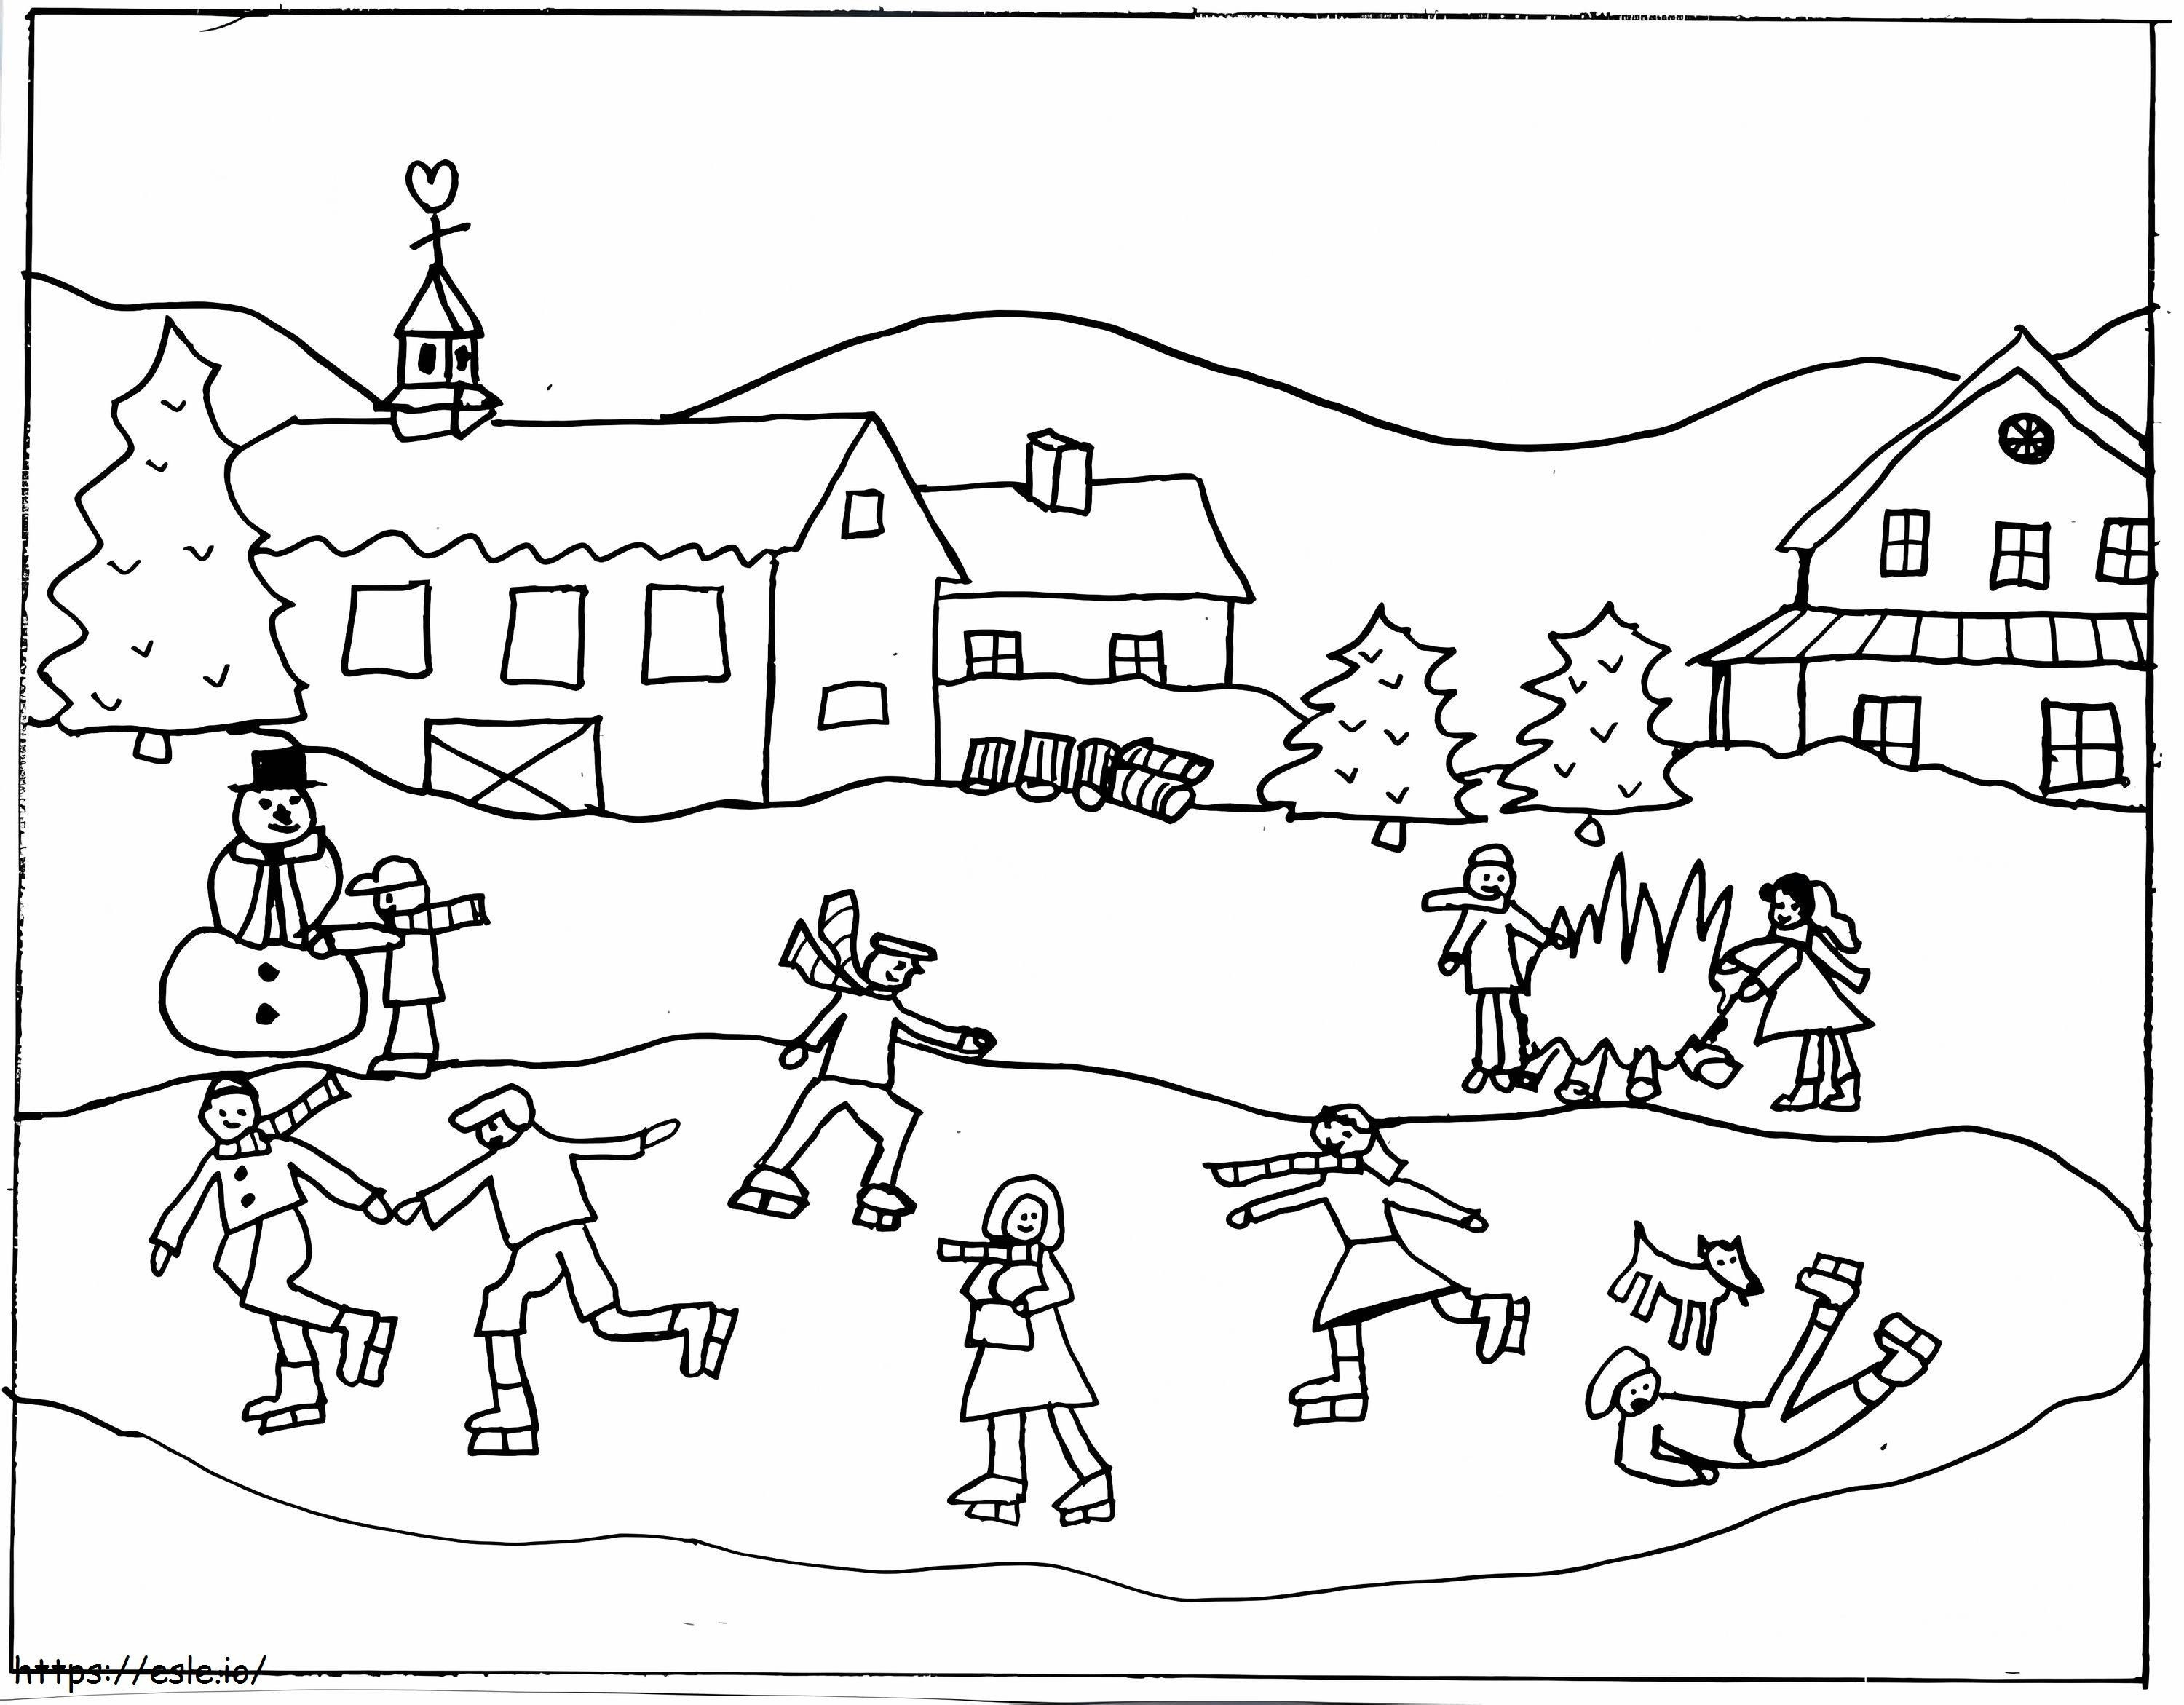 Ice Skating Winter Scene Coloring Page coloring page